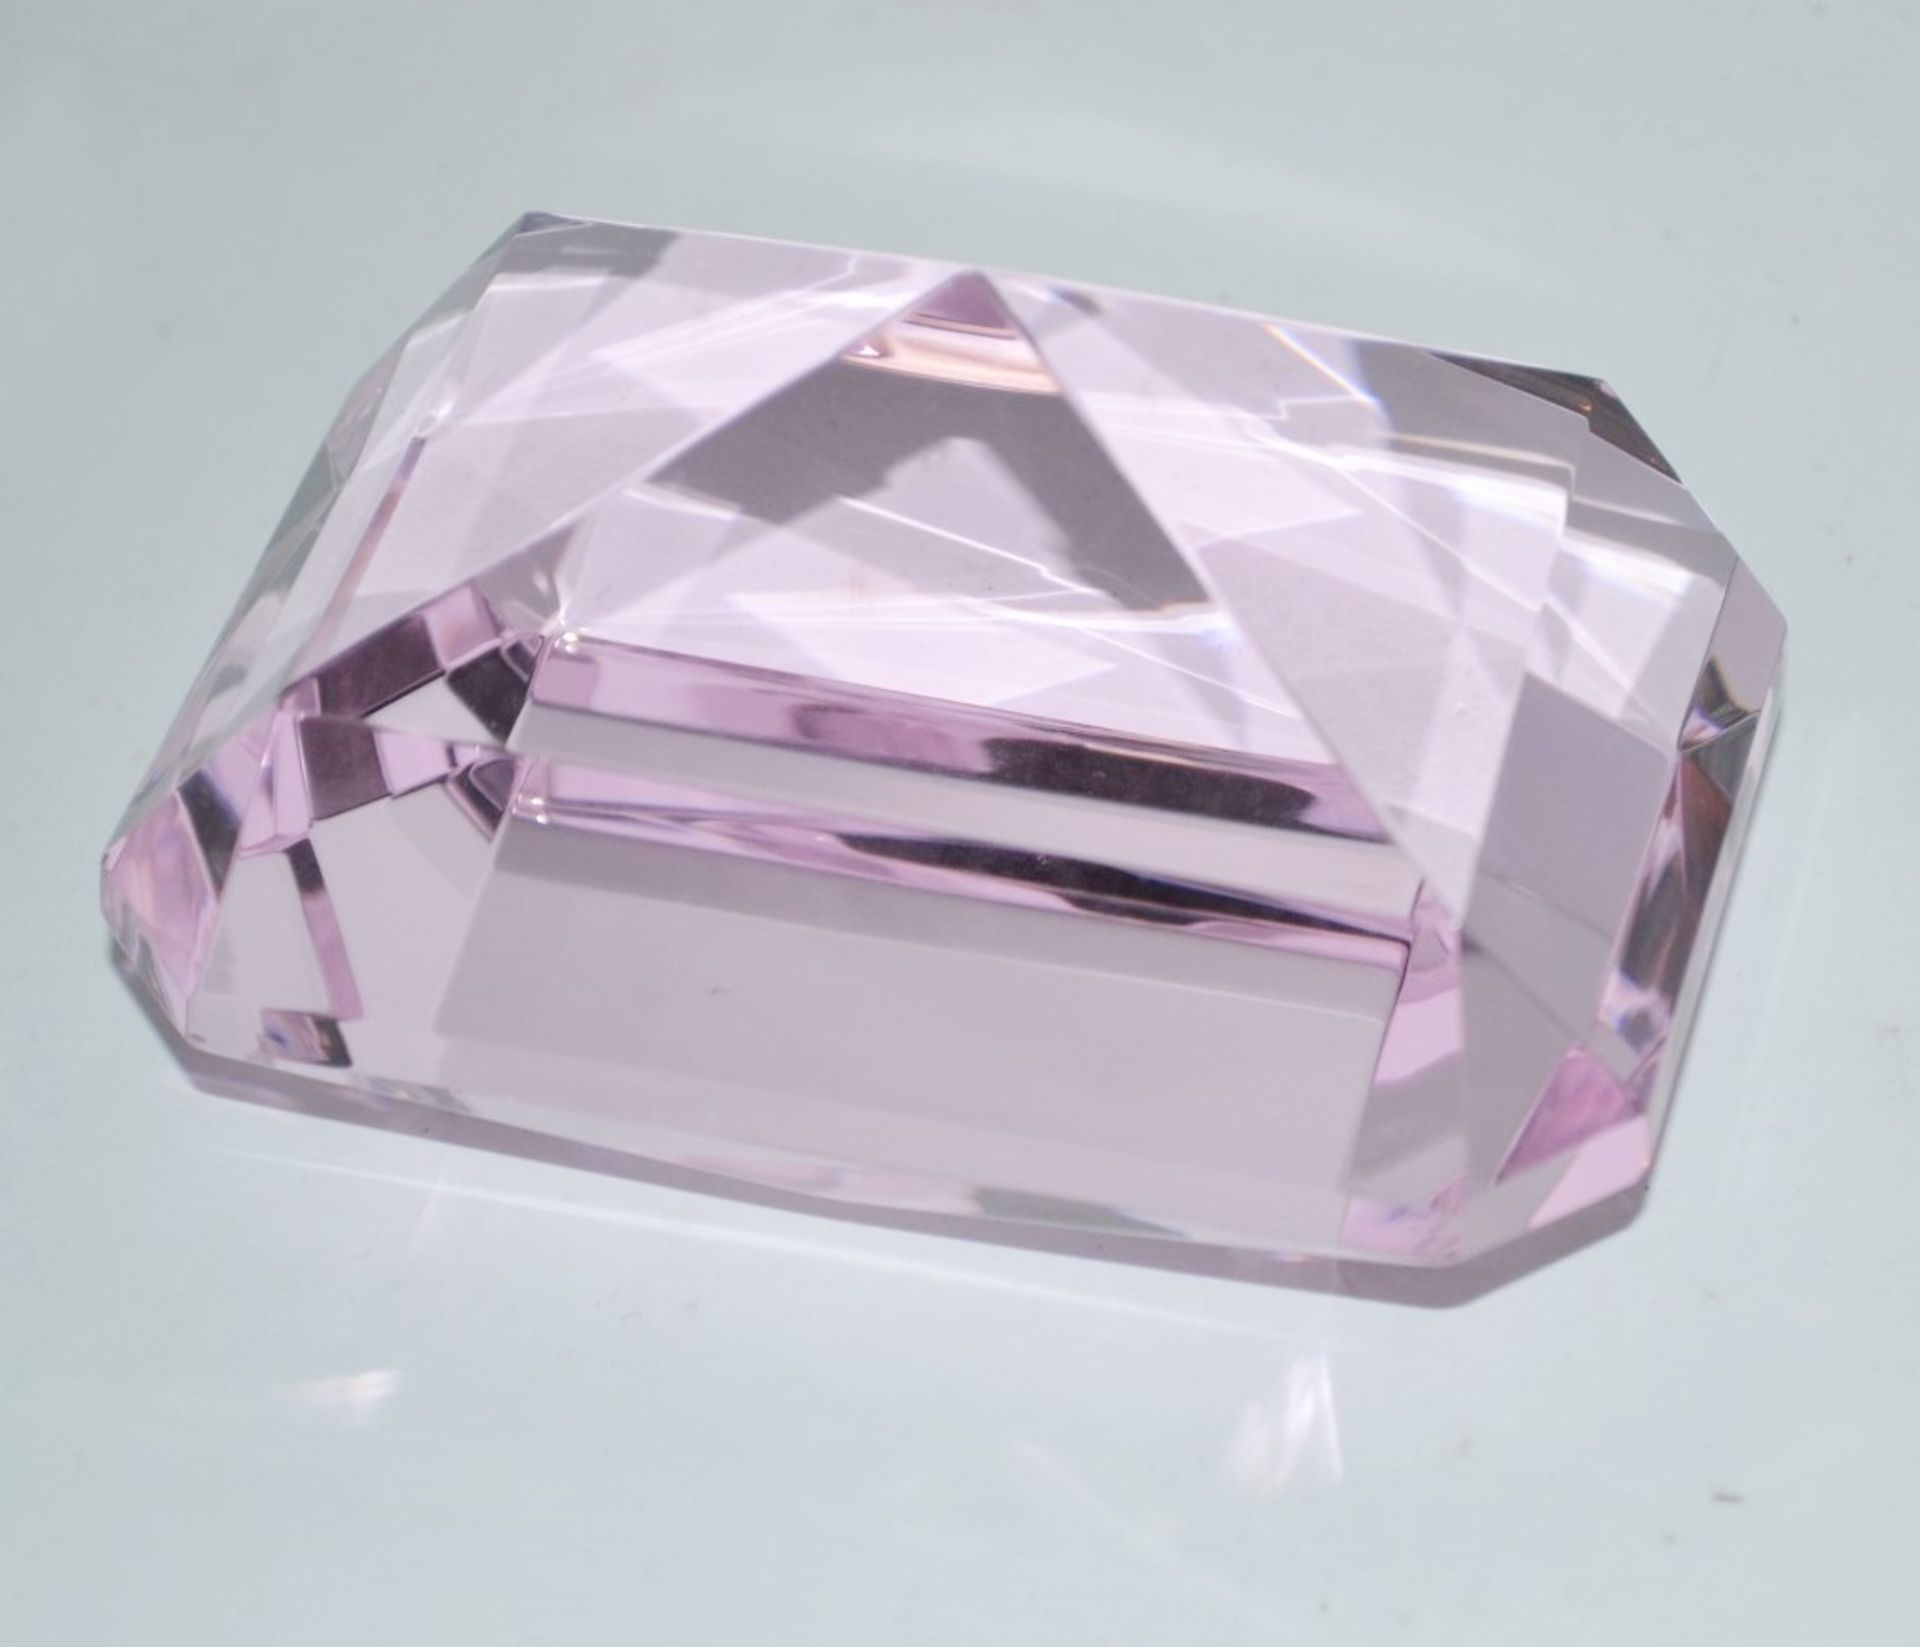 10 x ICE London Emerald Shaped Crystal Paperweight - Colour: Pink - 100mm In Diameter - New & - Image 3 of 4